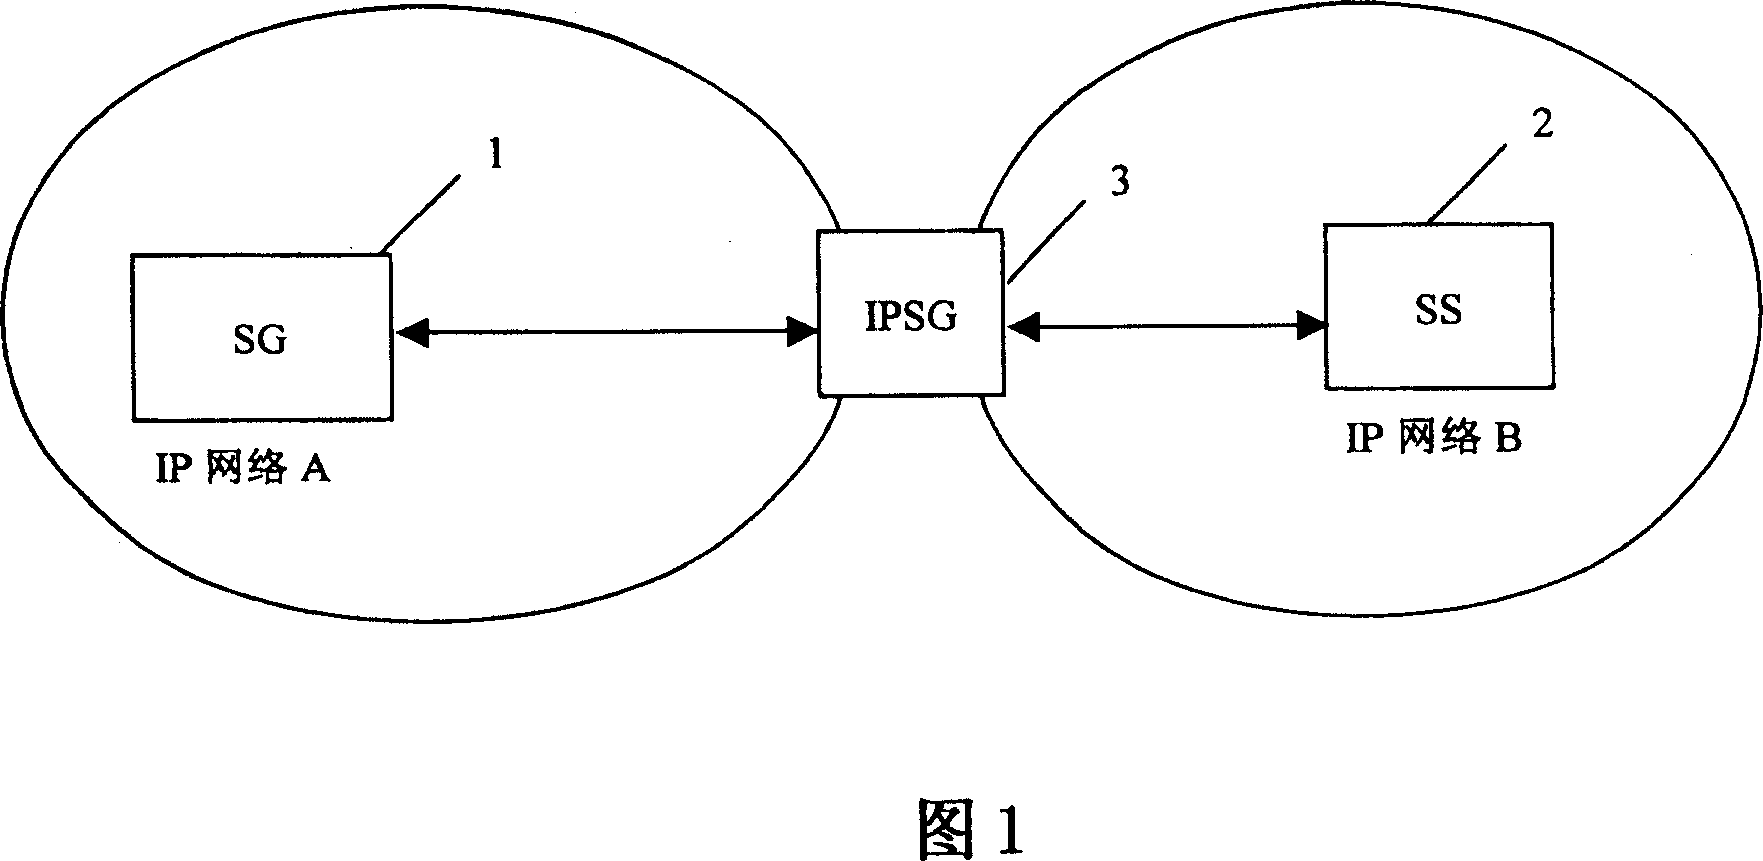 System and method for delivery of telecom signalling messages by passing private net boundary